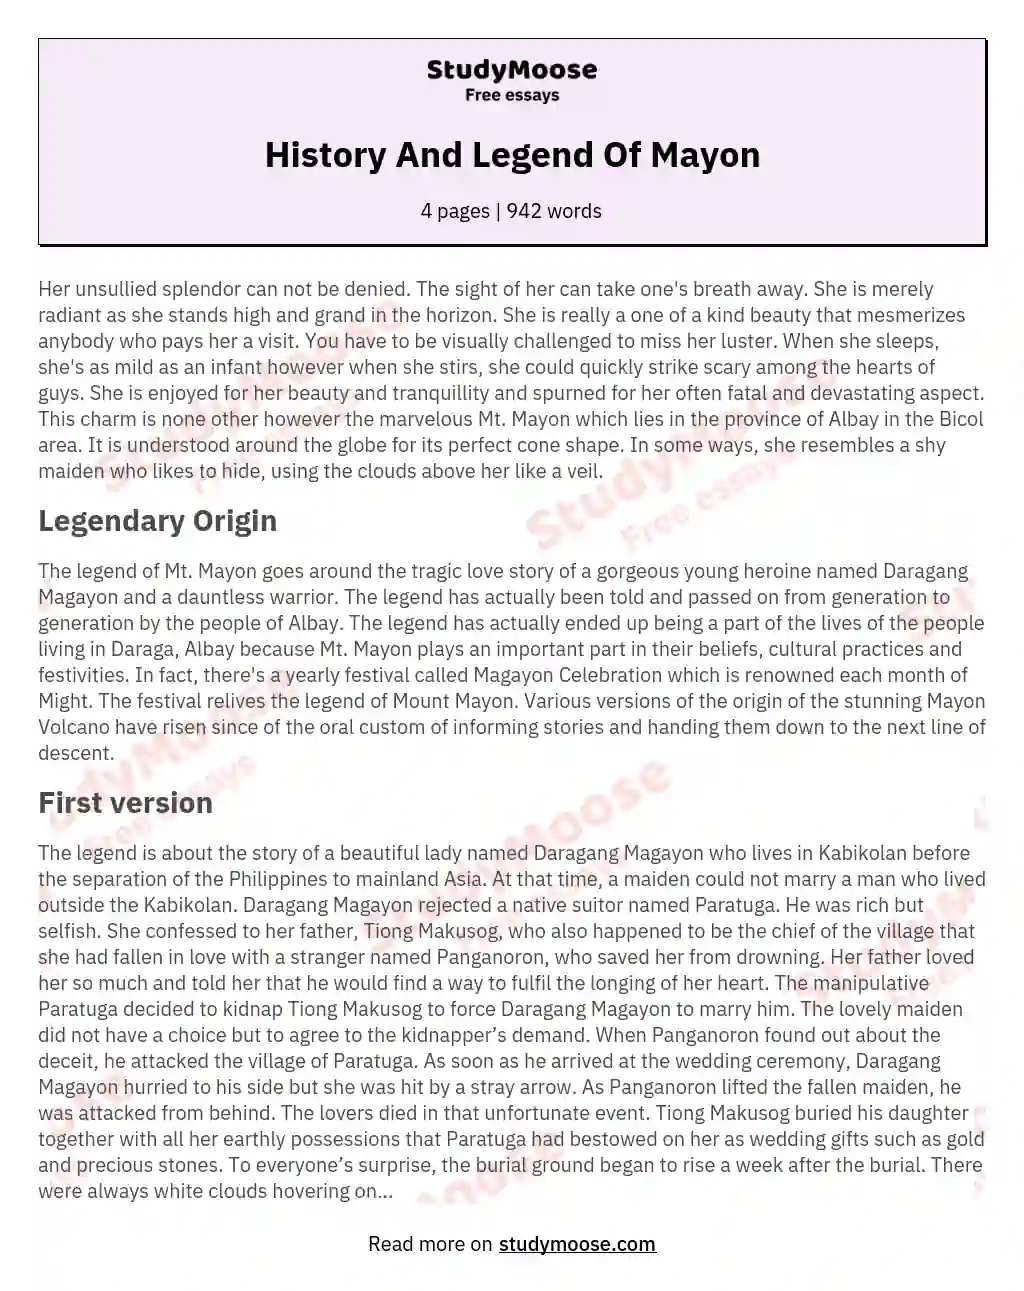 essay on history and legend